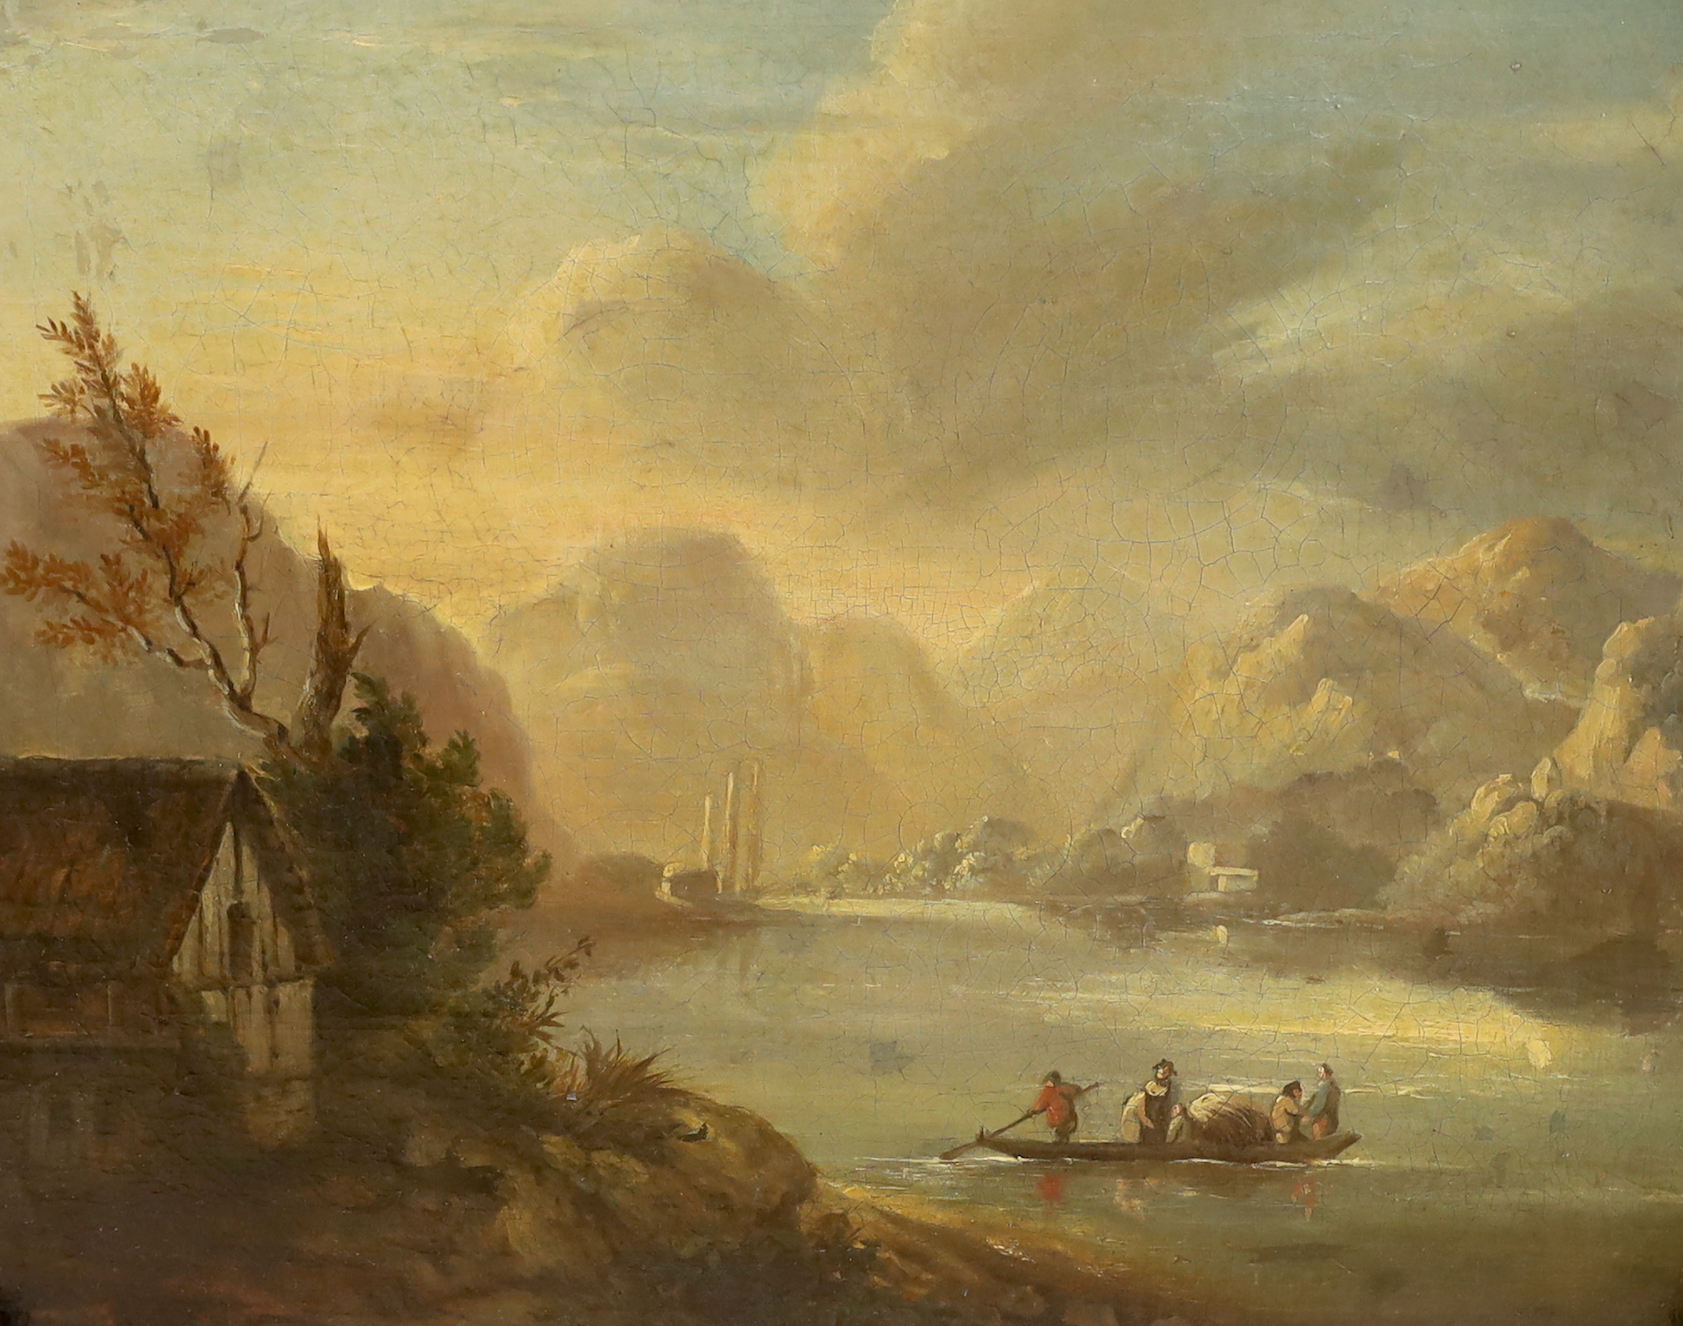 19th century English school, oil on canvas, Mountainous lake scene with figures in a boat, 35 x 43cm